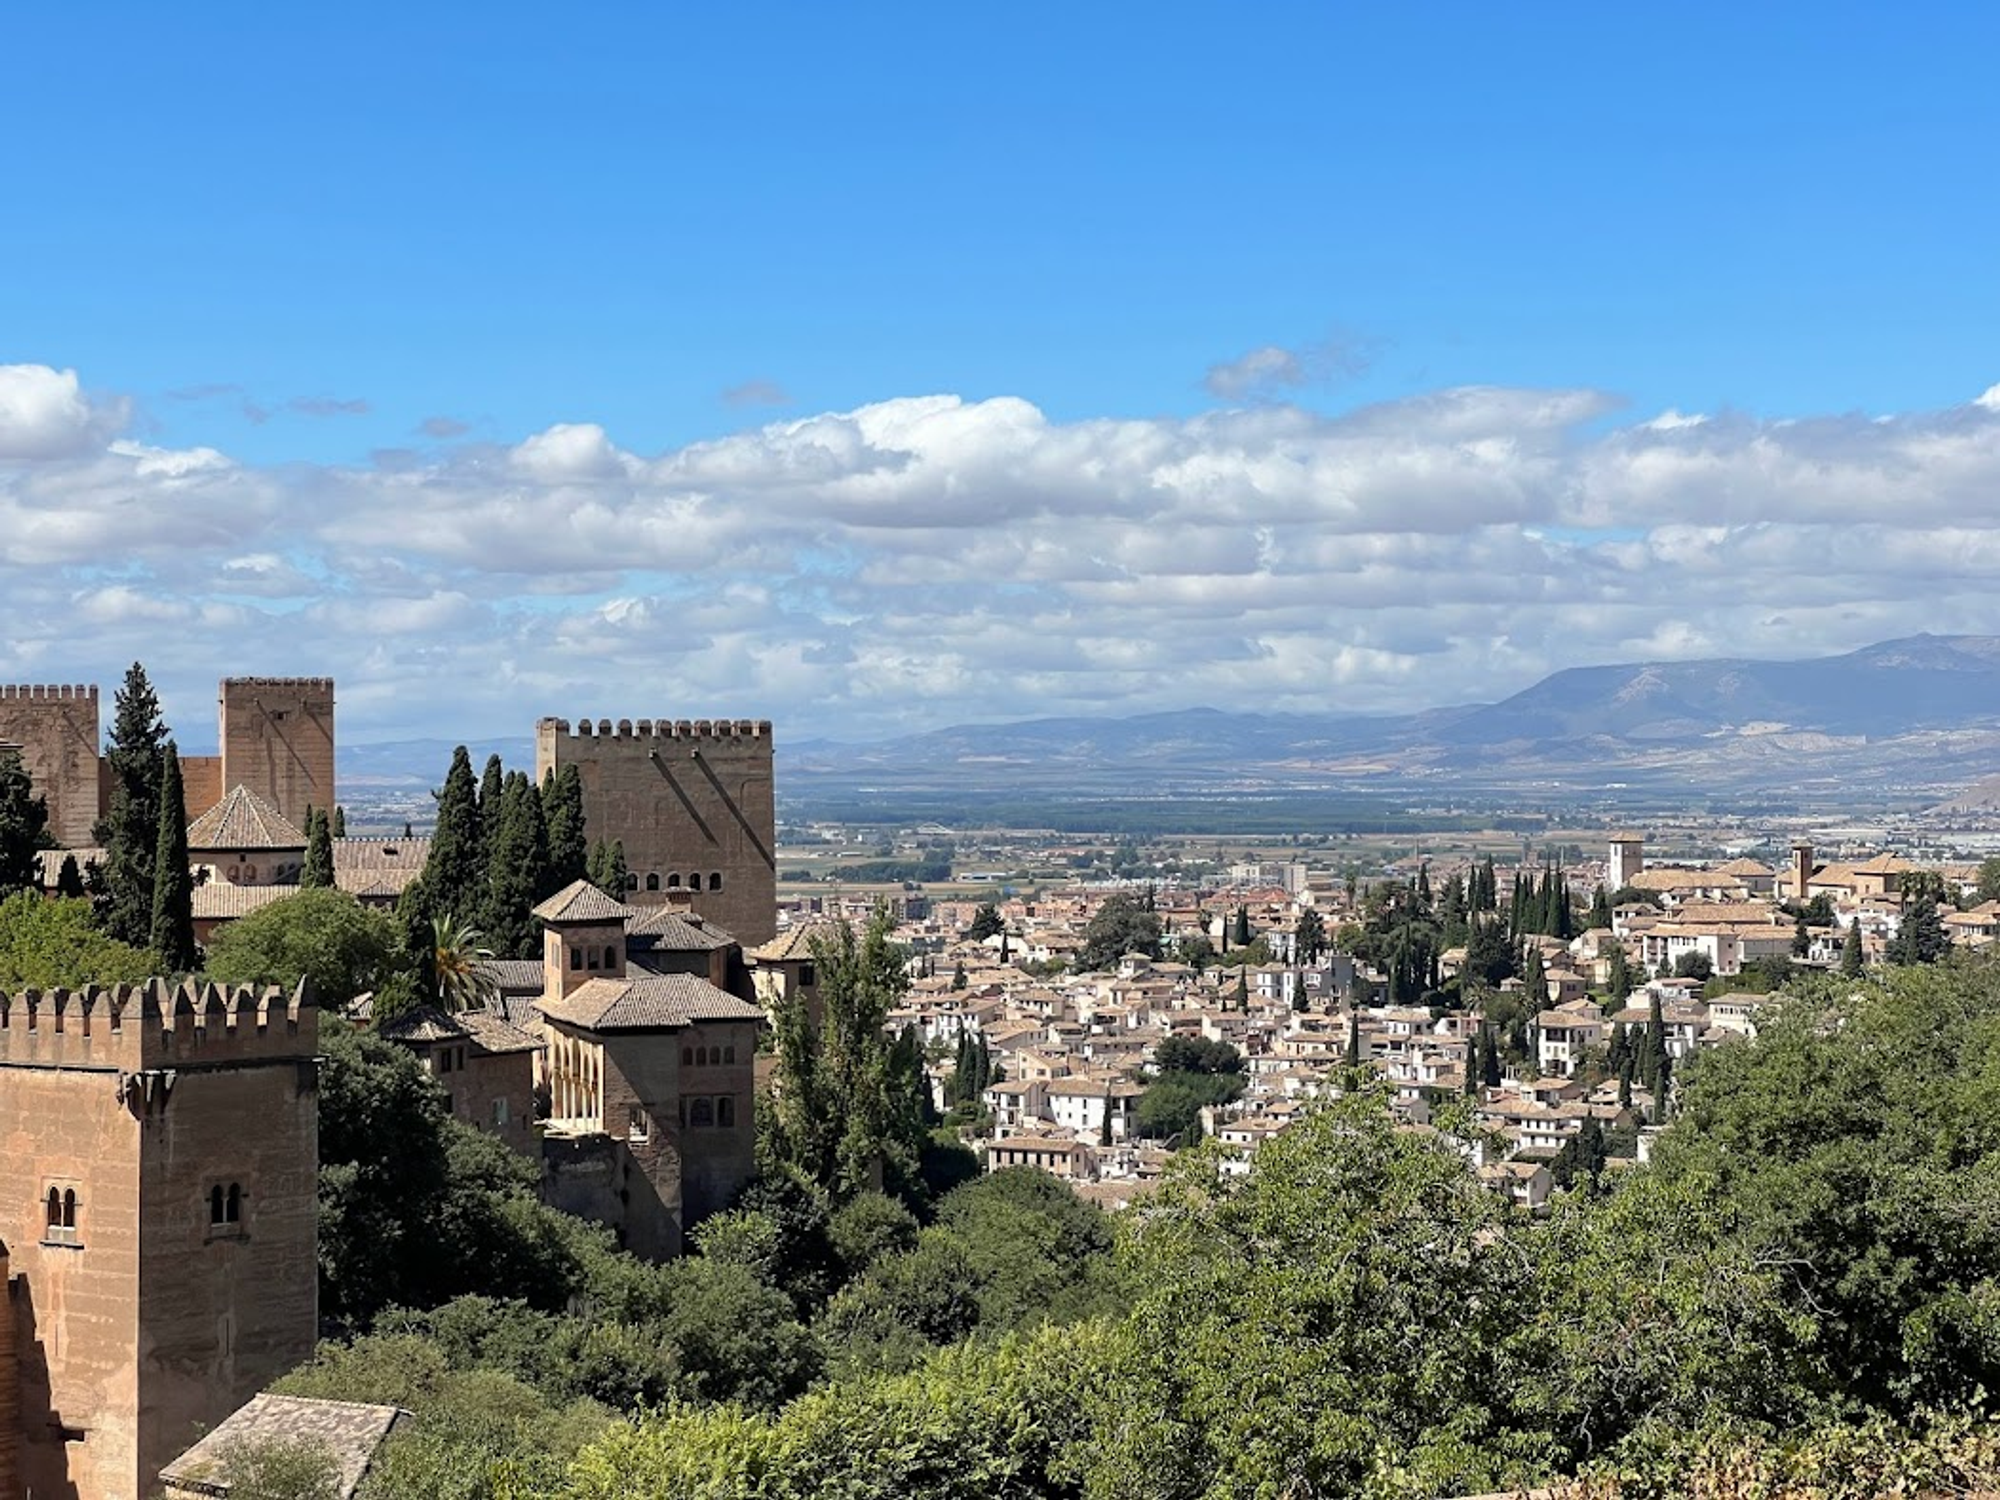 Overlooking Alhambra and the city.